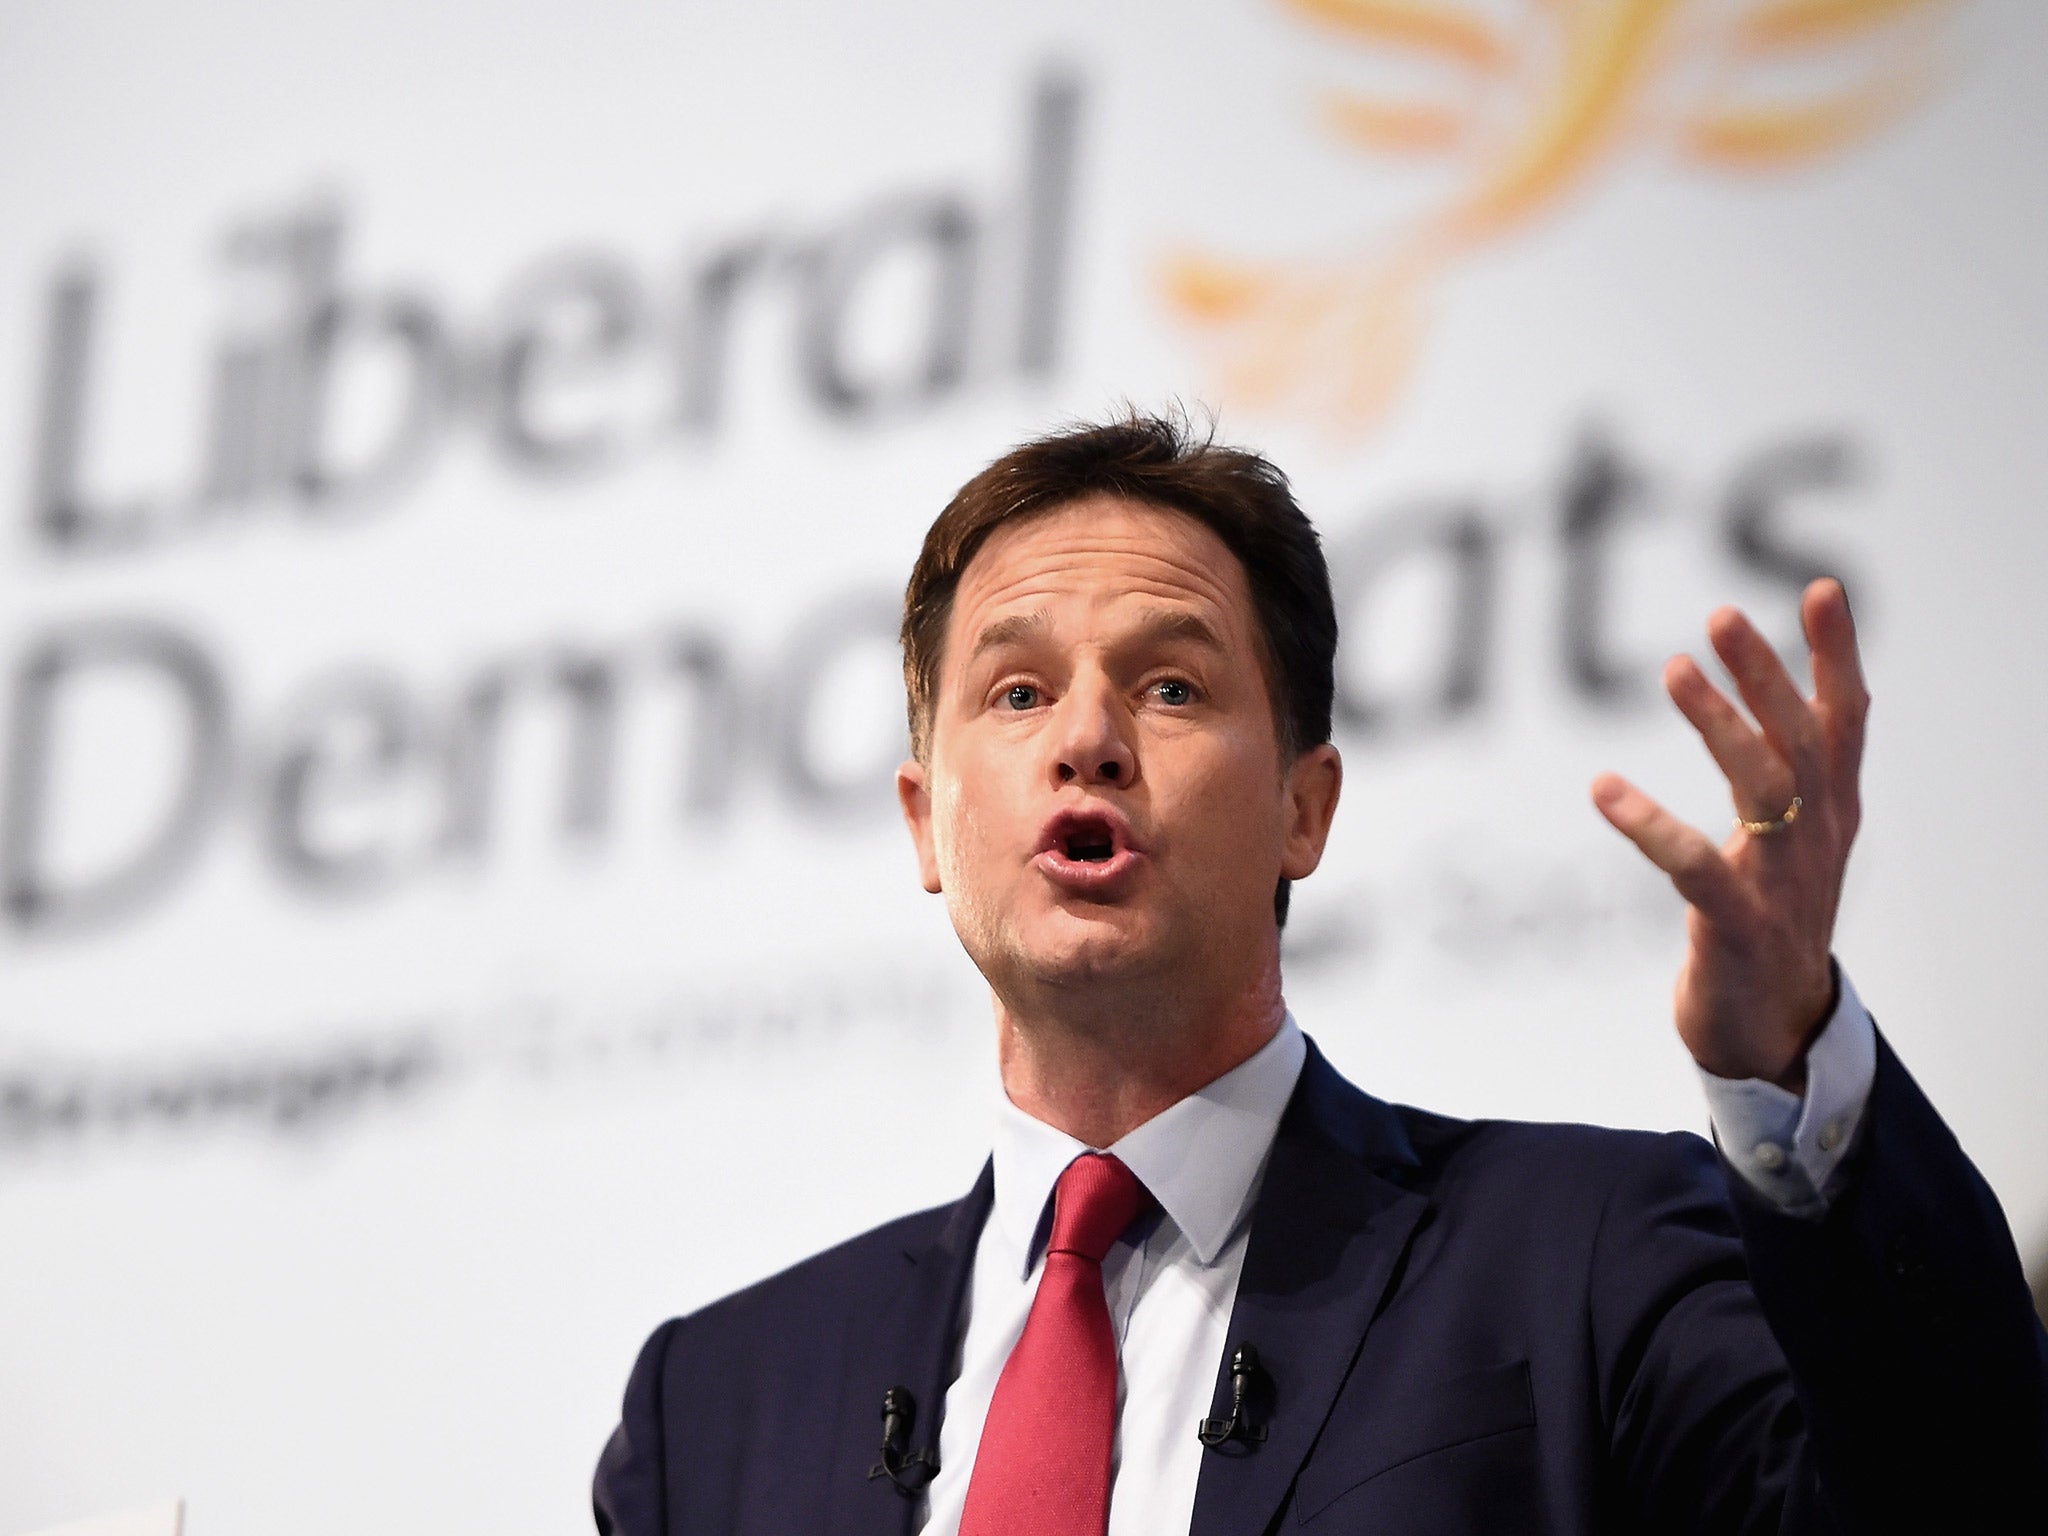 Nick Clegg's party denied claims that the document was leaked deliberately